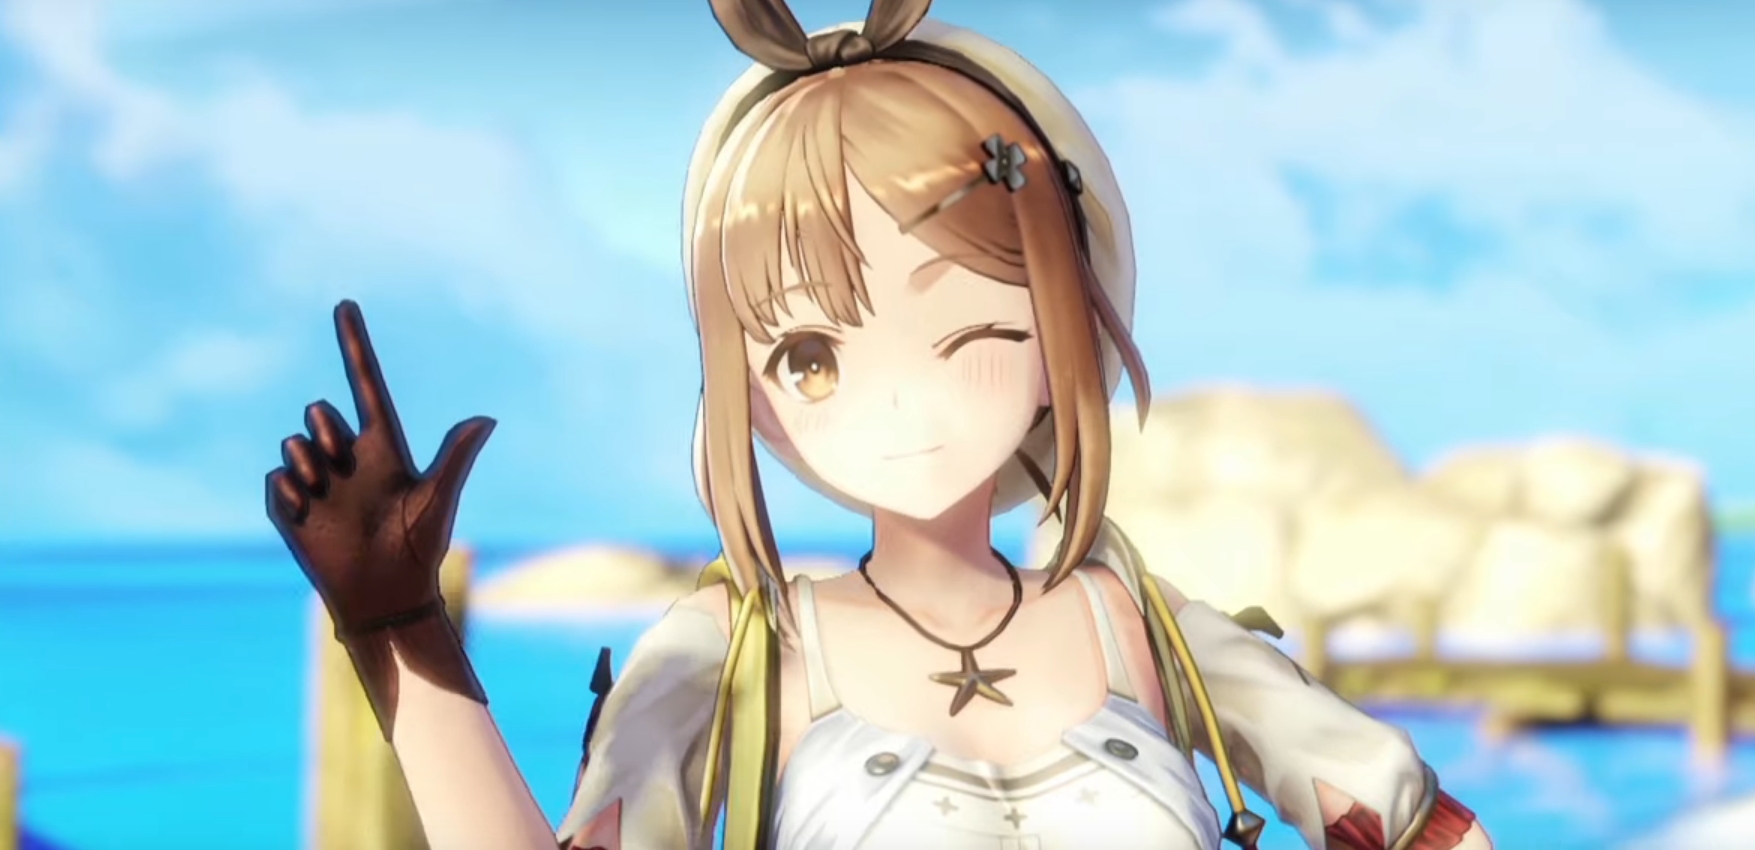 Atelier Ryza Update Includes More Music And Additional Story Content DLC